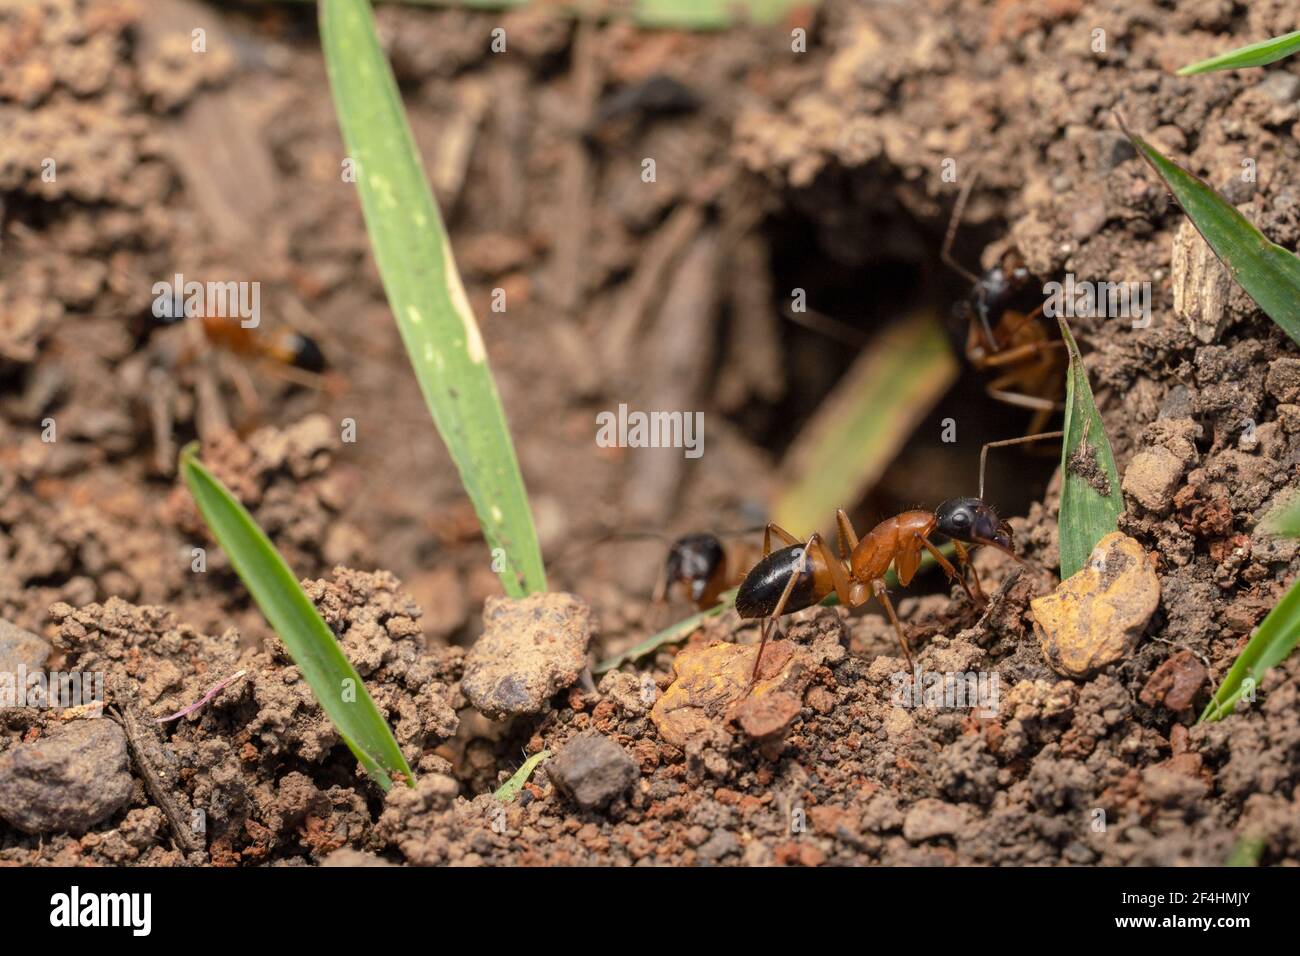 Orange sugar ants with black heads and tails coming out of its hole/home Stock Photo